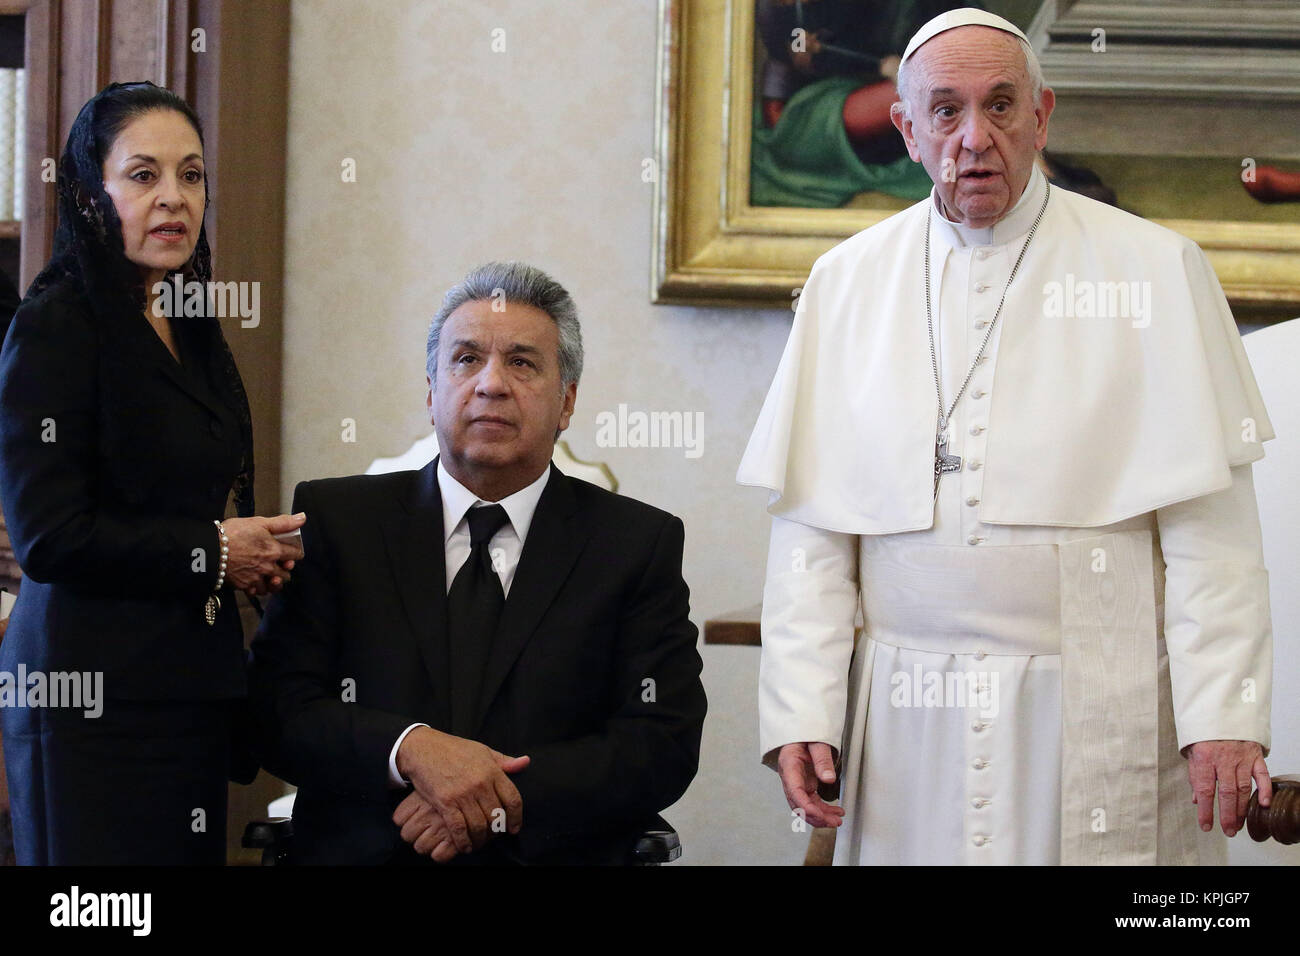 Vatican City, Vatican. 16th December, 2017. POPE FRANCIS meets the Ecuador's president LENIN MORENO GARCES in a private audience at the Vatican Credit: Evandro Inetti/ZUMA Wire/Alamy Live News Stock Photo